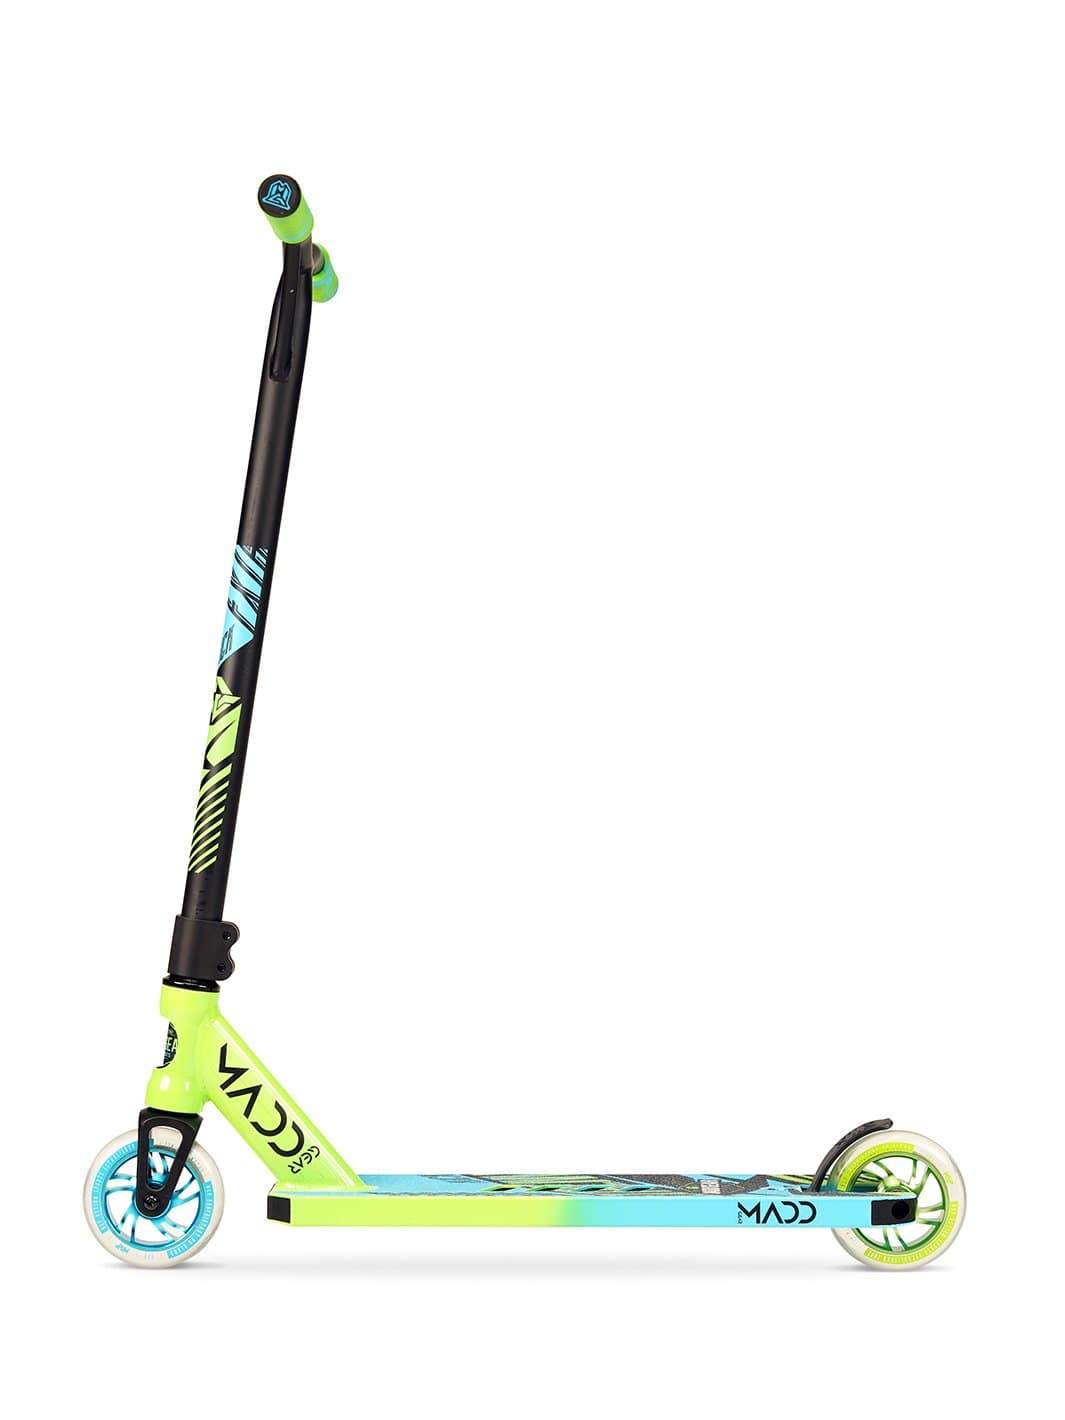 Madd Gear Neon Colors MGP Kick Extreme Stunt Scooter Complete High Quality Razor Pro Trick Skate Park Mad Green Blue